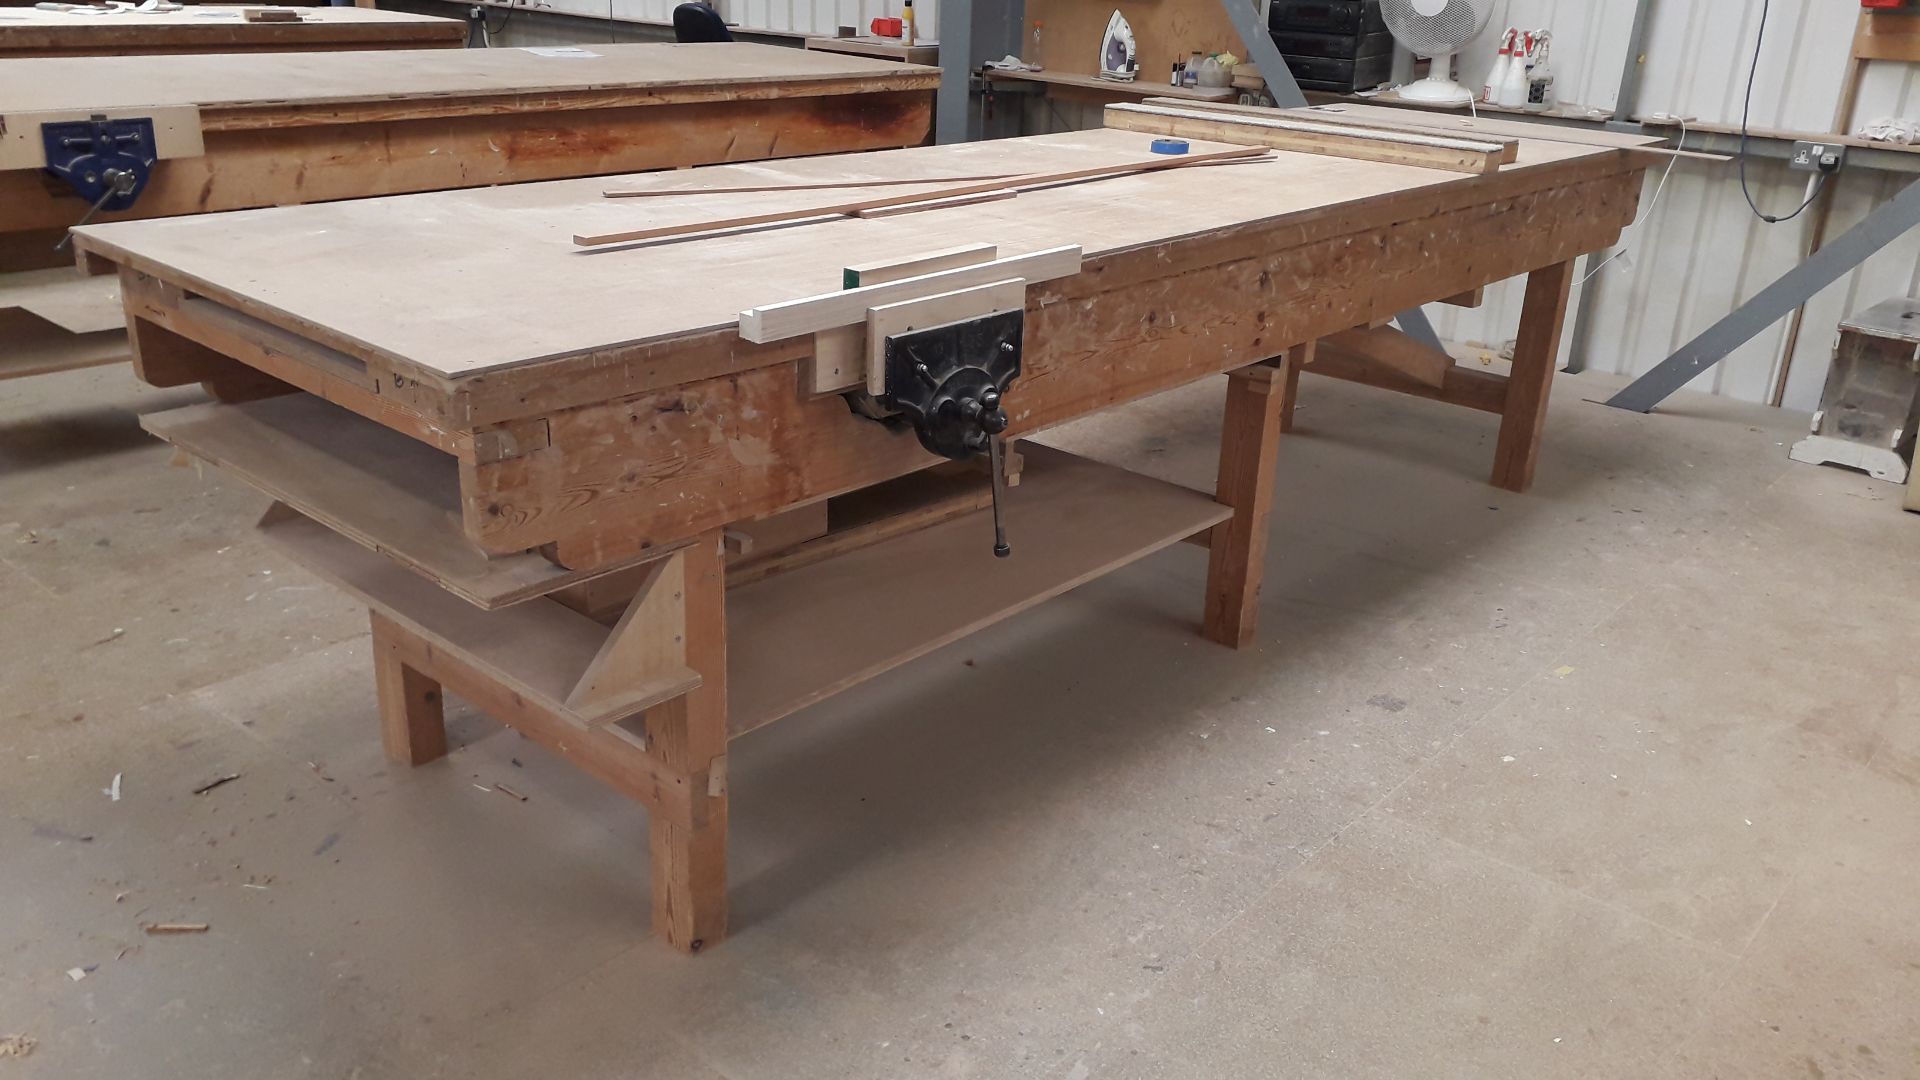 3x Timber Workbenches with Vice and Storage Under, Approx 4m x 1m - Located on 1st Floor. Contents - Image 2 of 7